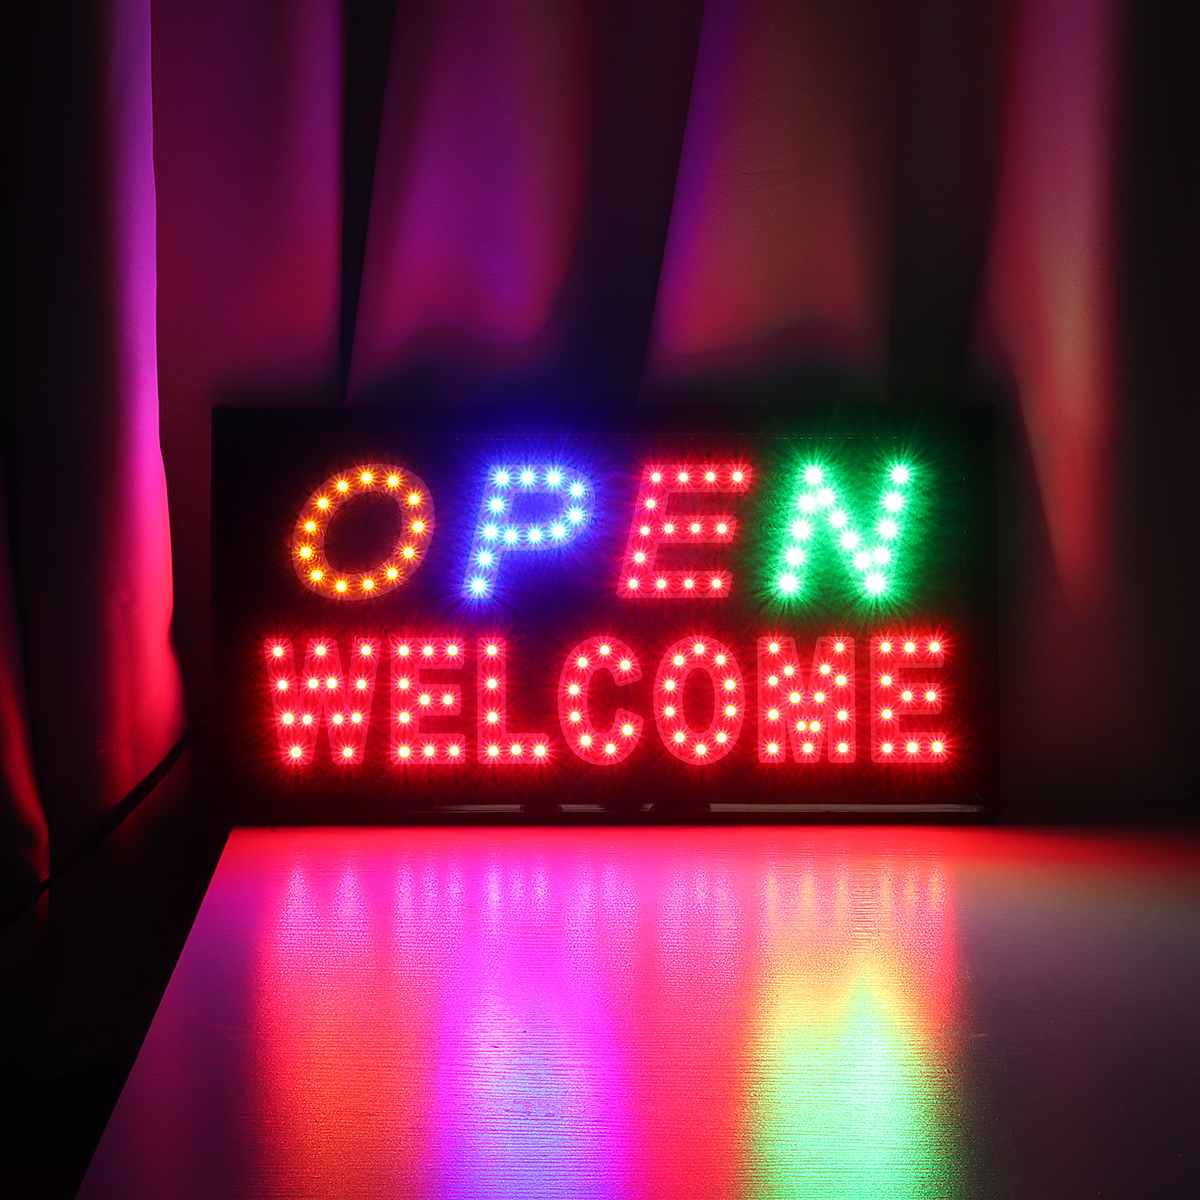 LED Store Open Sign Advertising Light Board Shopping Mall Bright Animated Motion Neon Business Store Billboard US AU Plug